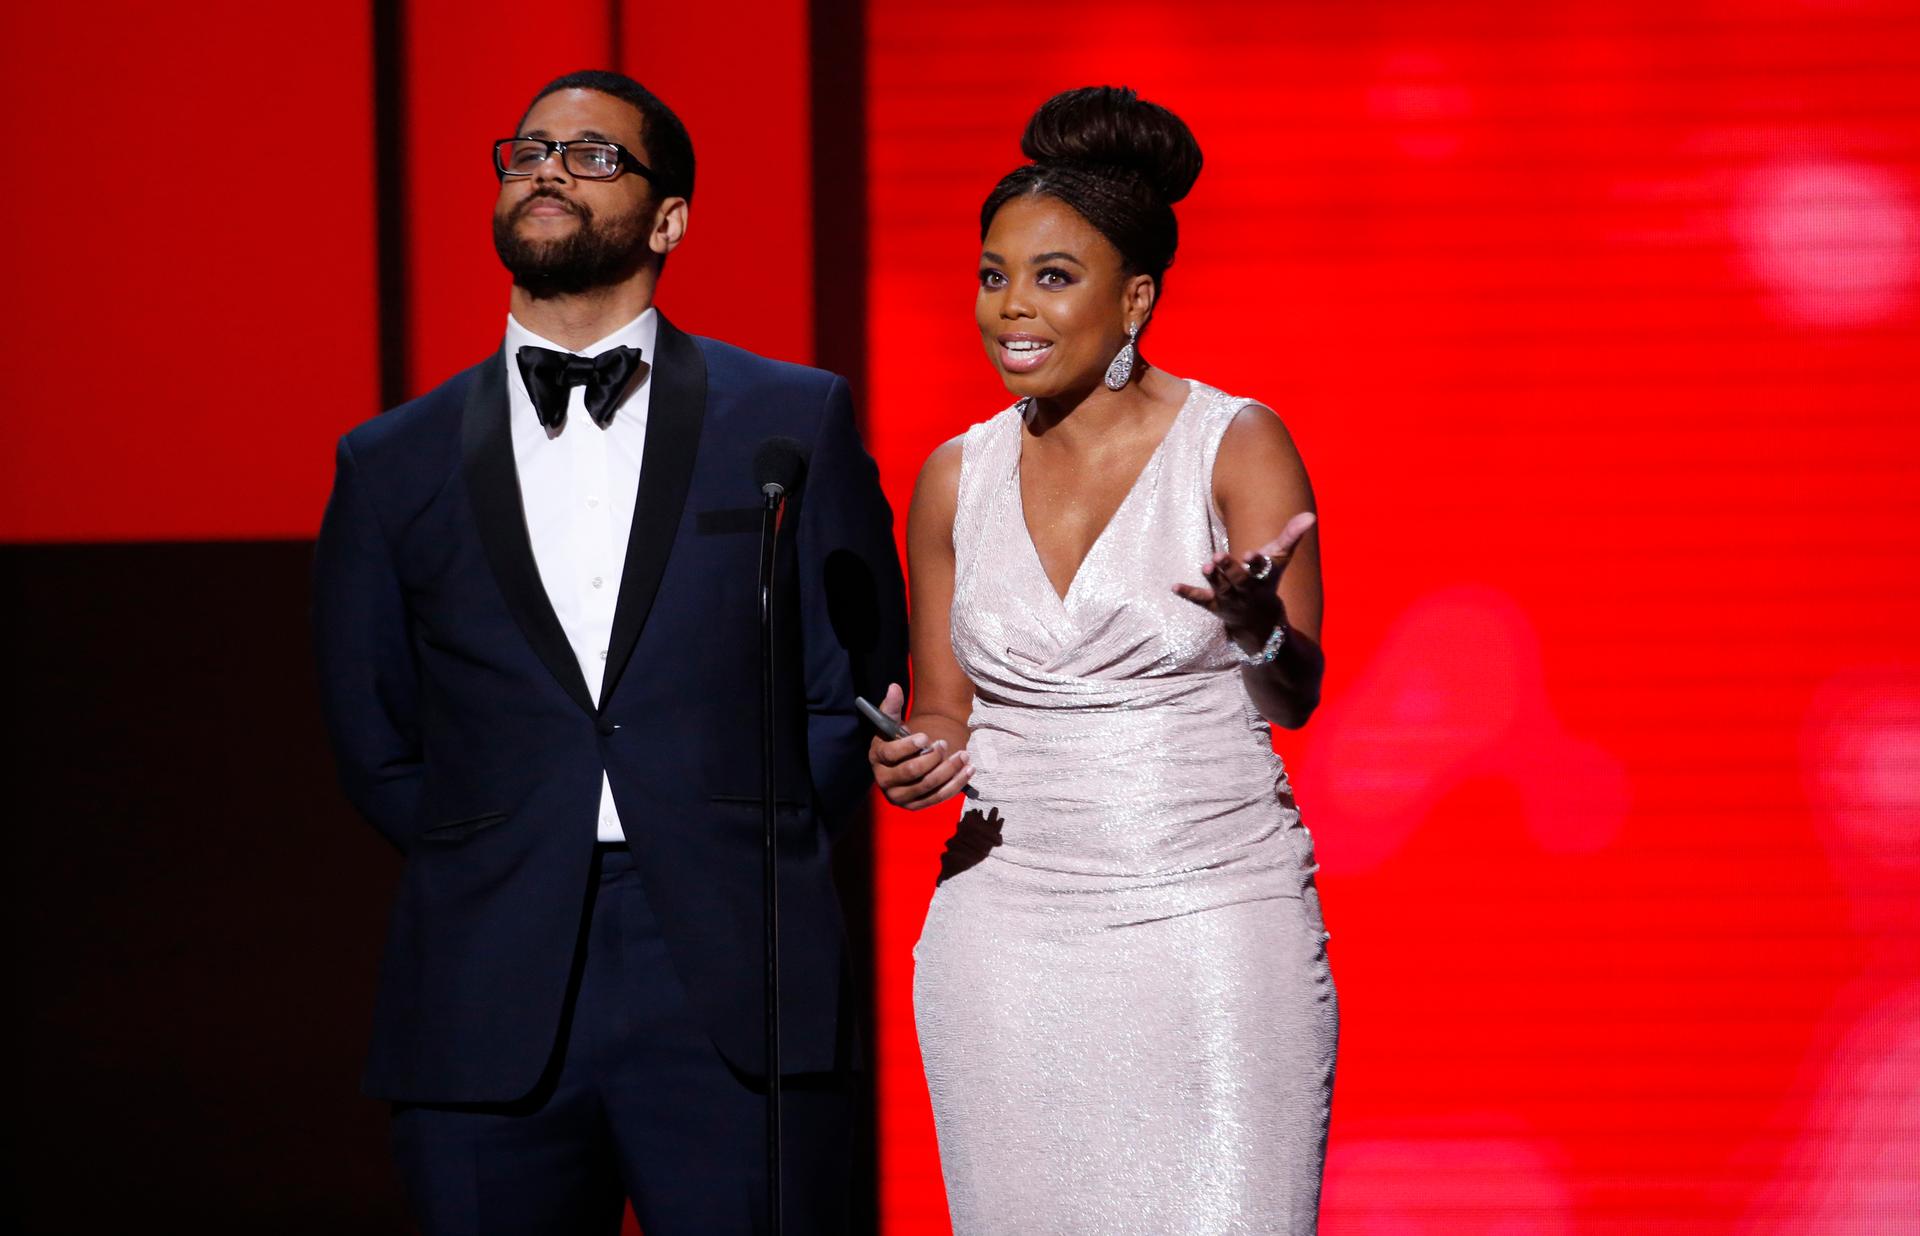 Presenters Jemele Hill and Michael Smith speak on stage at 49th NAACP Image Awards.